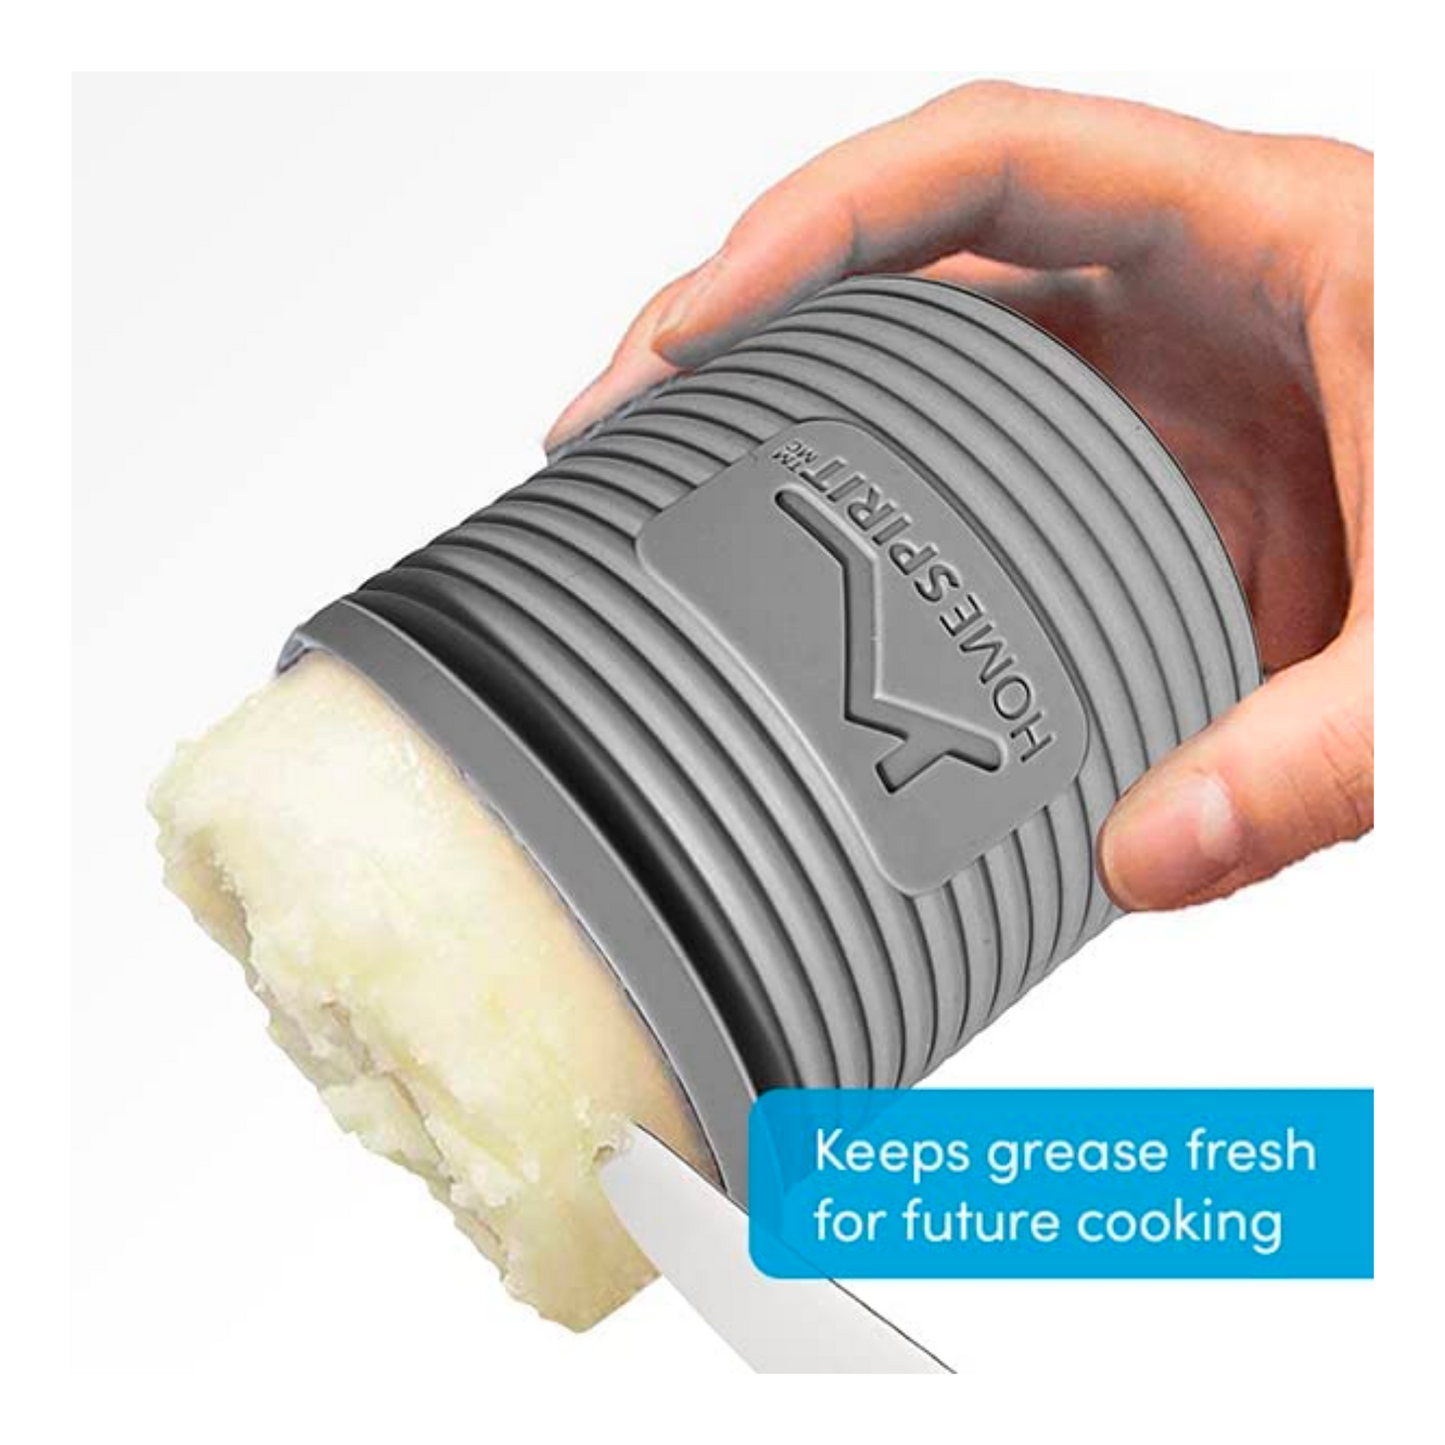 Silicone Grease Container